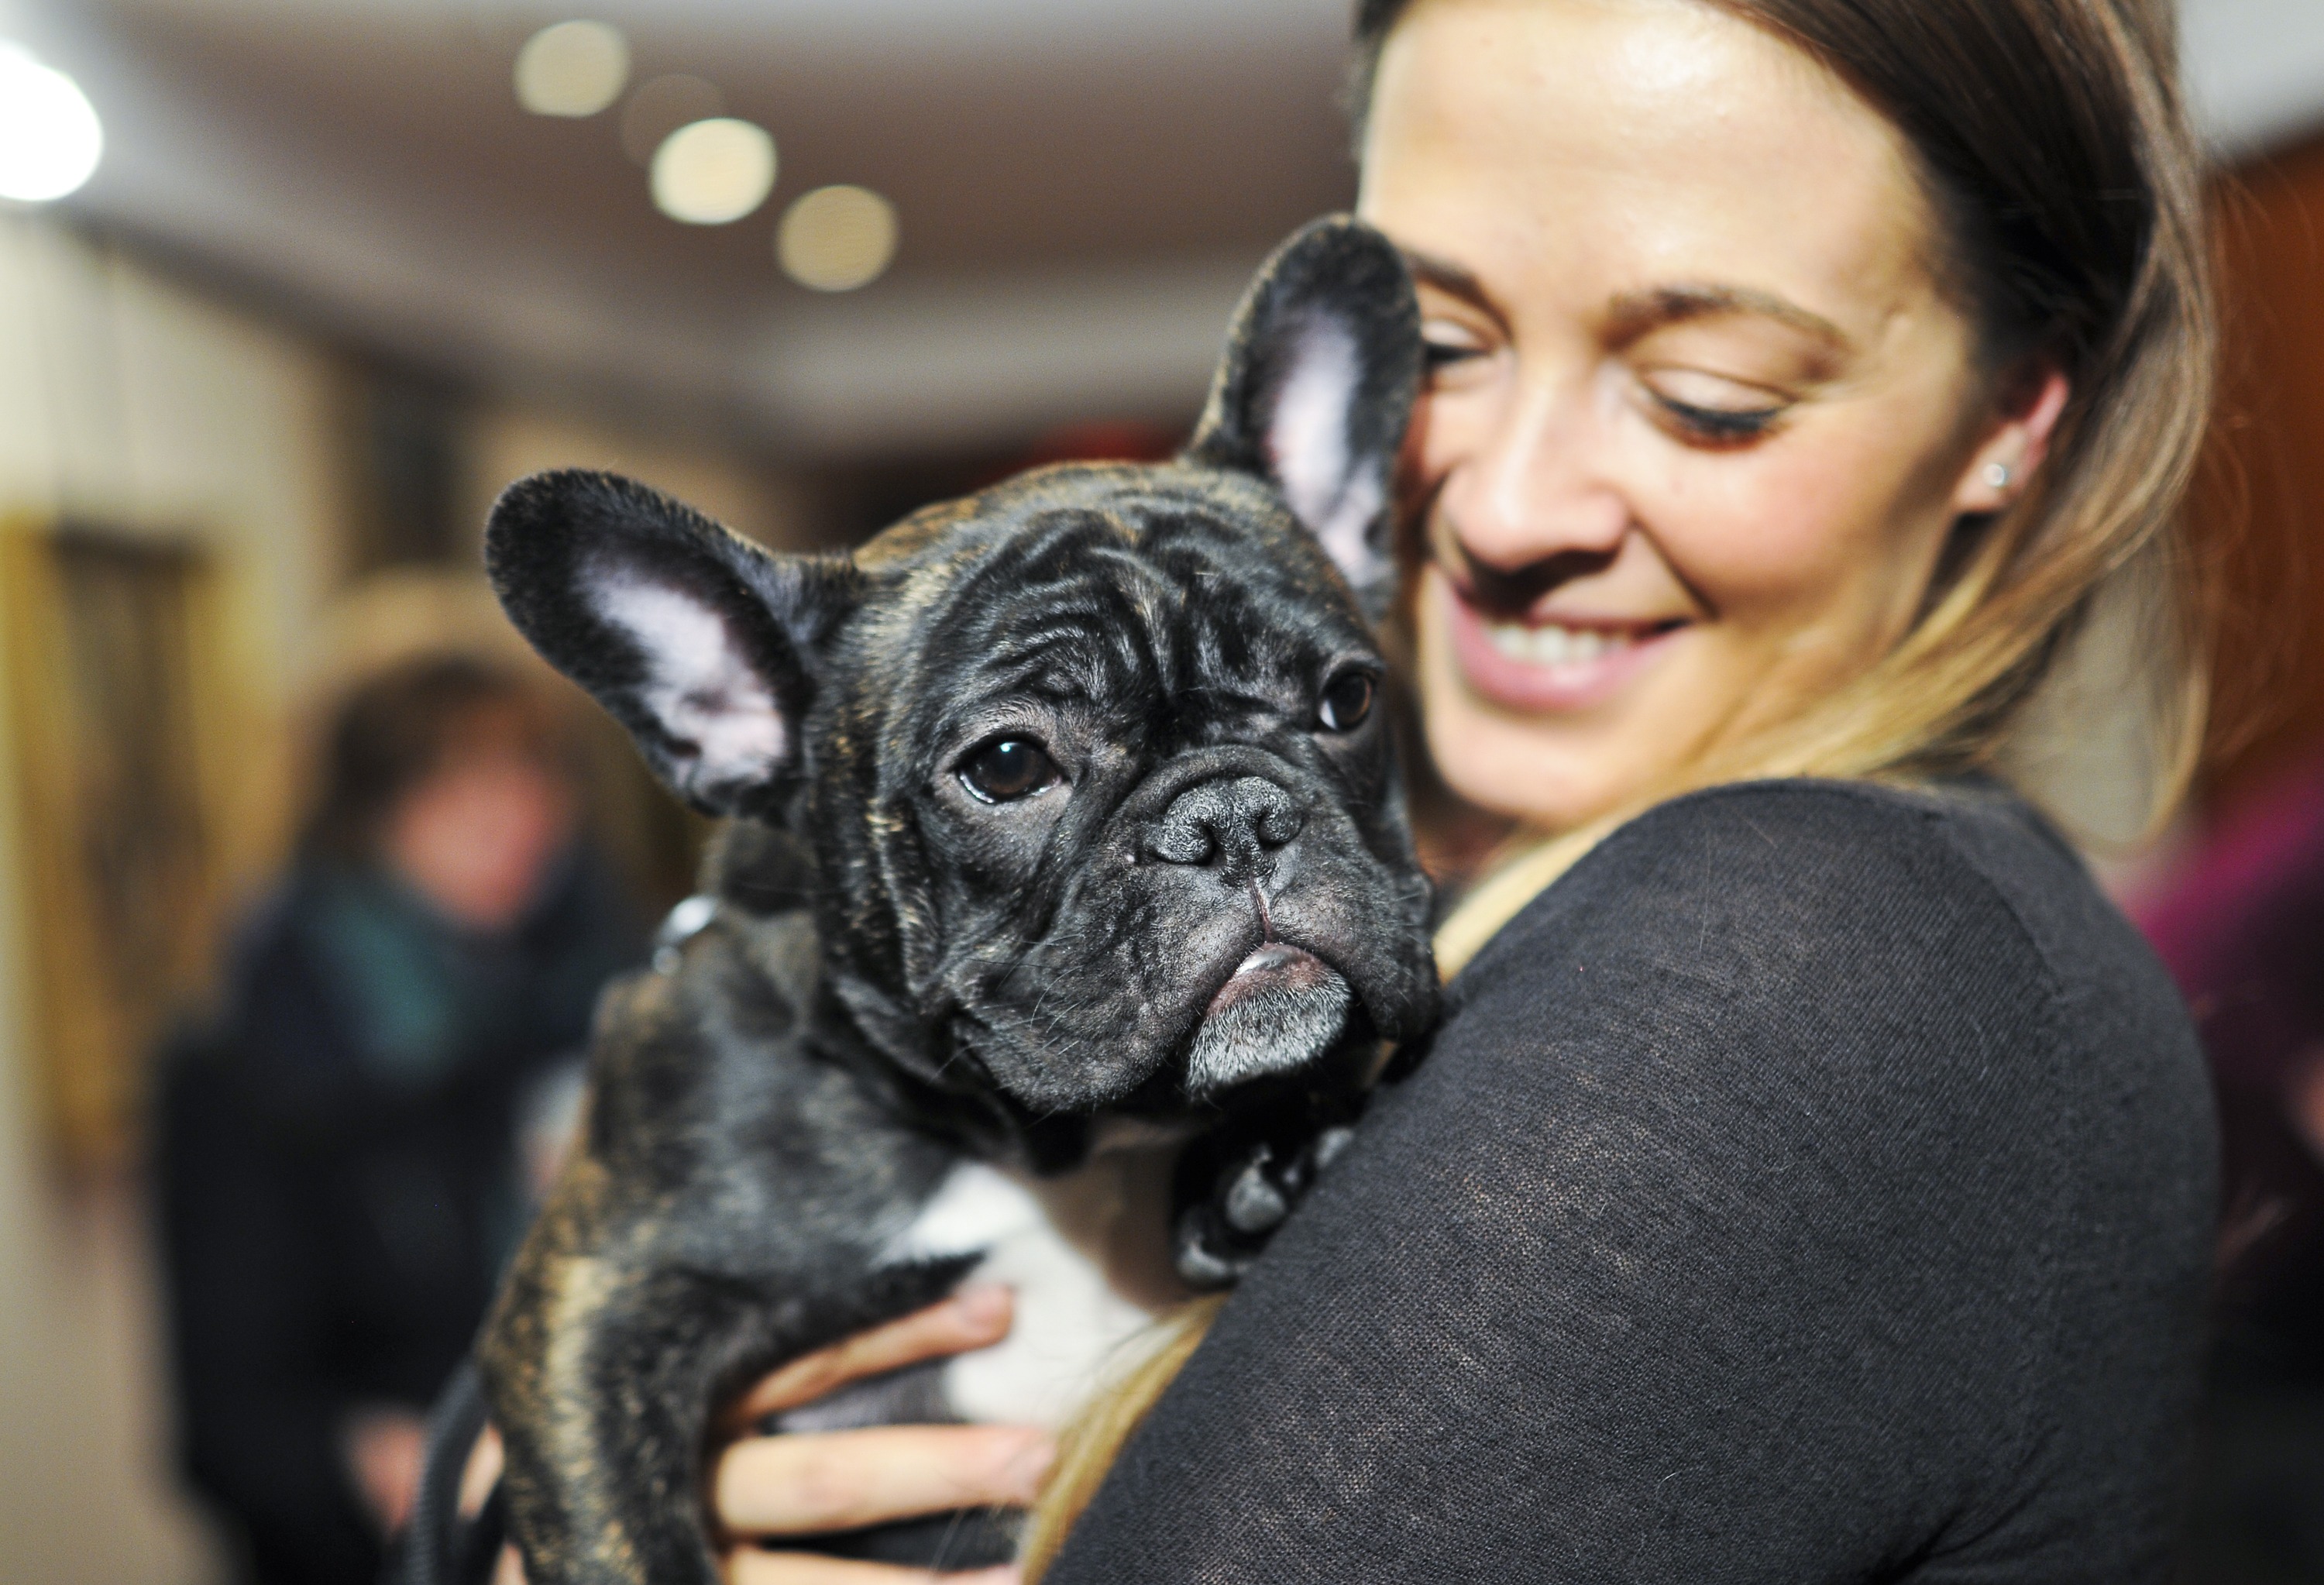 French Bulldogs Are Among the Most Popular Breeds to Dognap